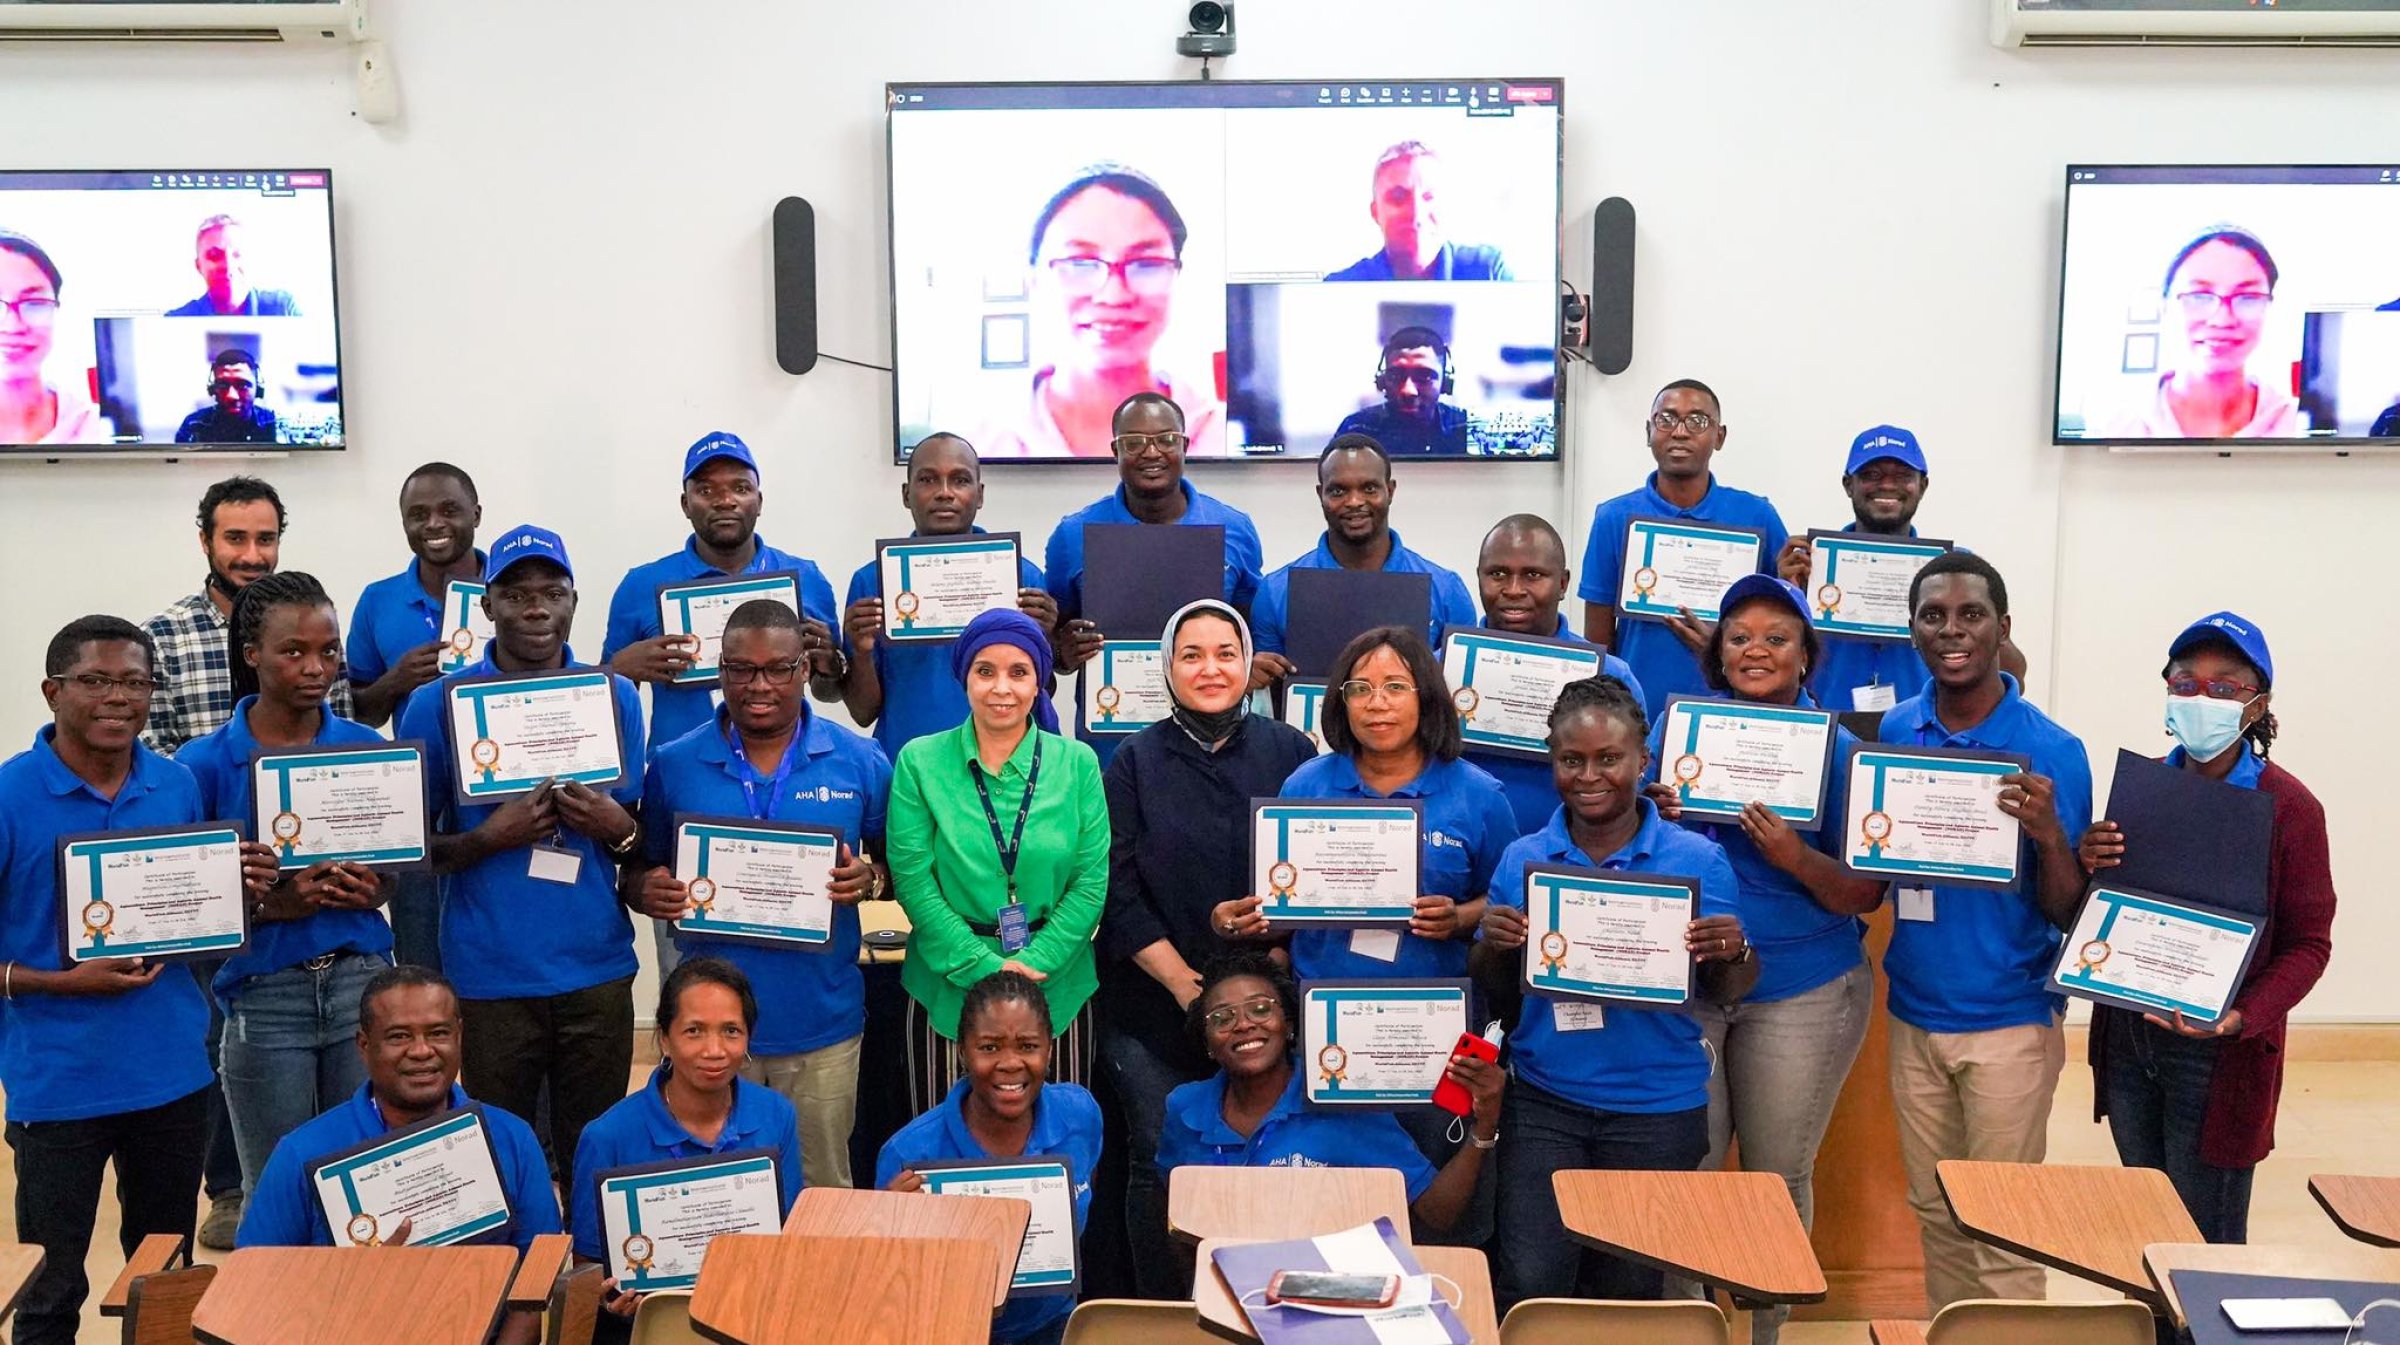 22 participants from Kenya, Ghana, Madagascar, Mozambique, and Zambia benefited from the training program. Photo: Jacob Zornu